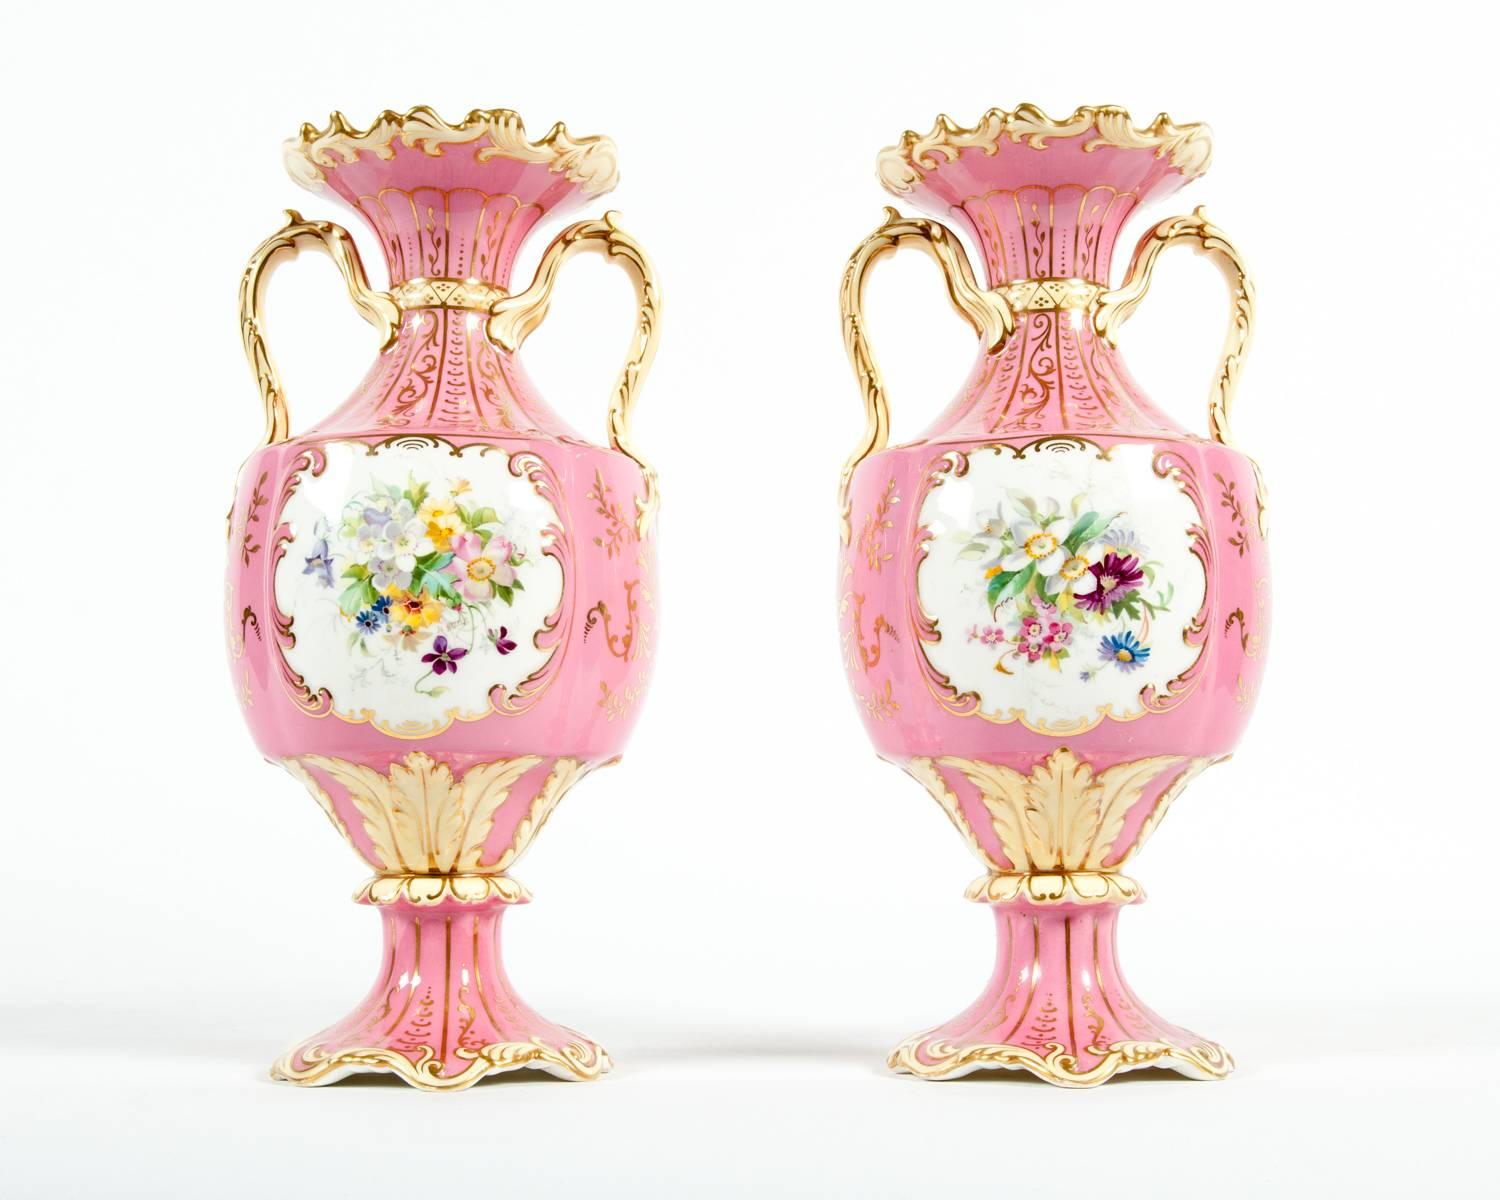 Antique pair English glazed porcelain decorative vases or pieces with interior / exterior design details . Each vase is in excellent antique condition , maker's mark undersigned . Each decorative vase / piece  measure 11 inches tall x 6 inches